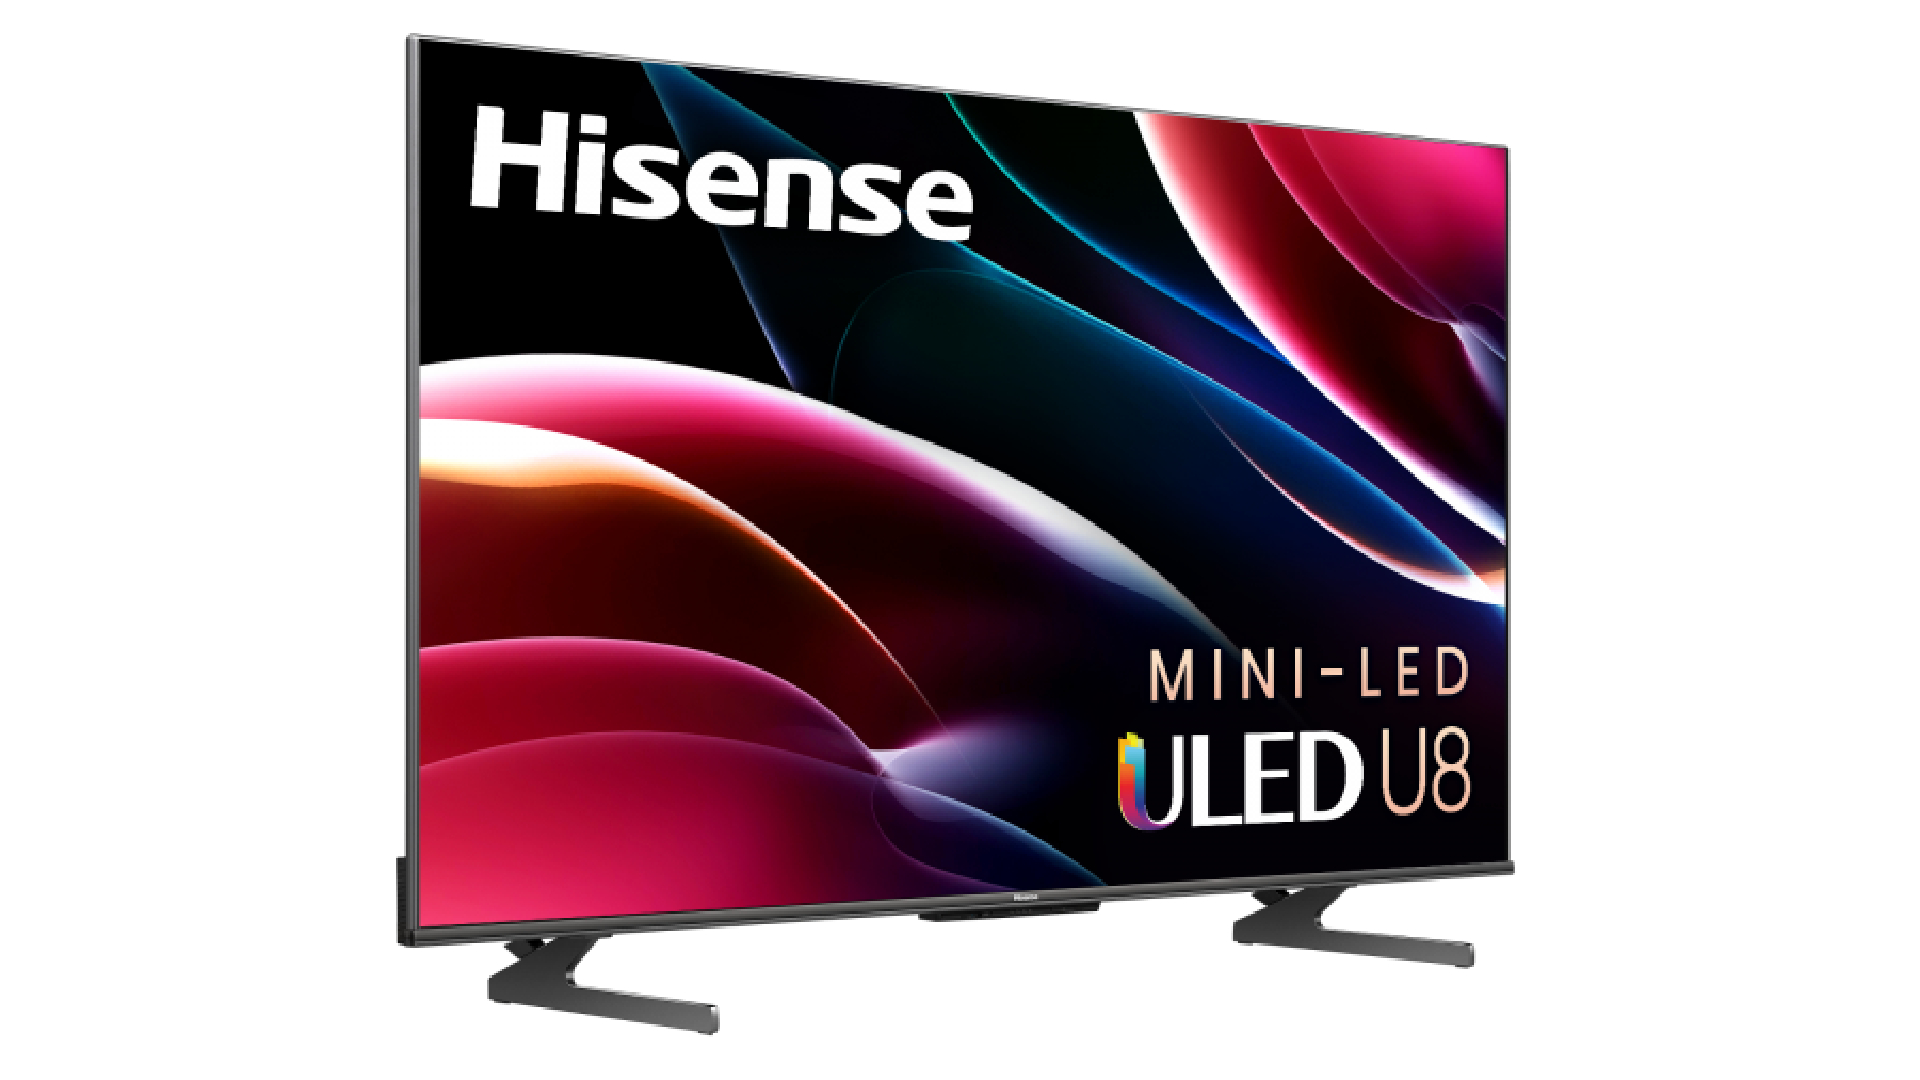 Mini-LED TV: What It Is and How It Improves Samsung, TCL, Hisense